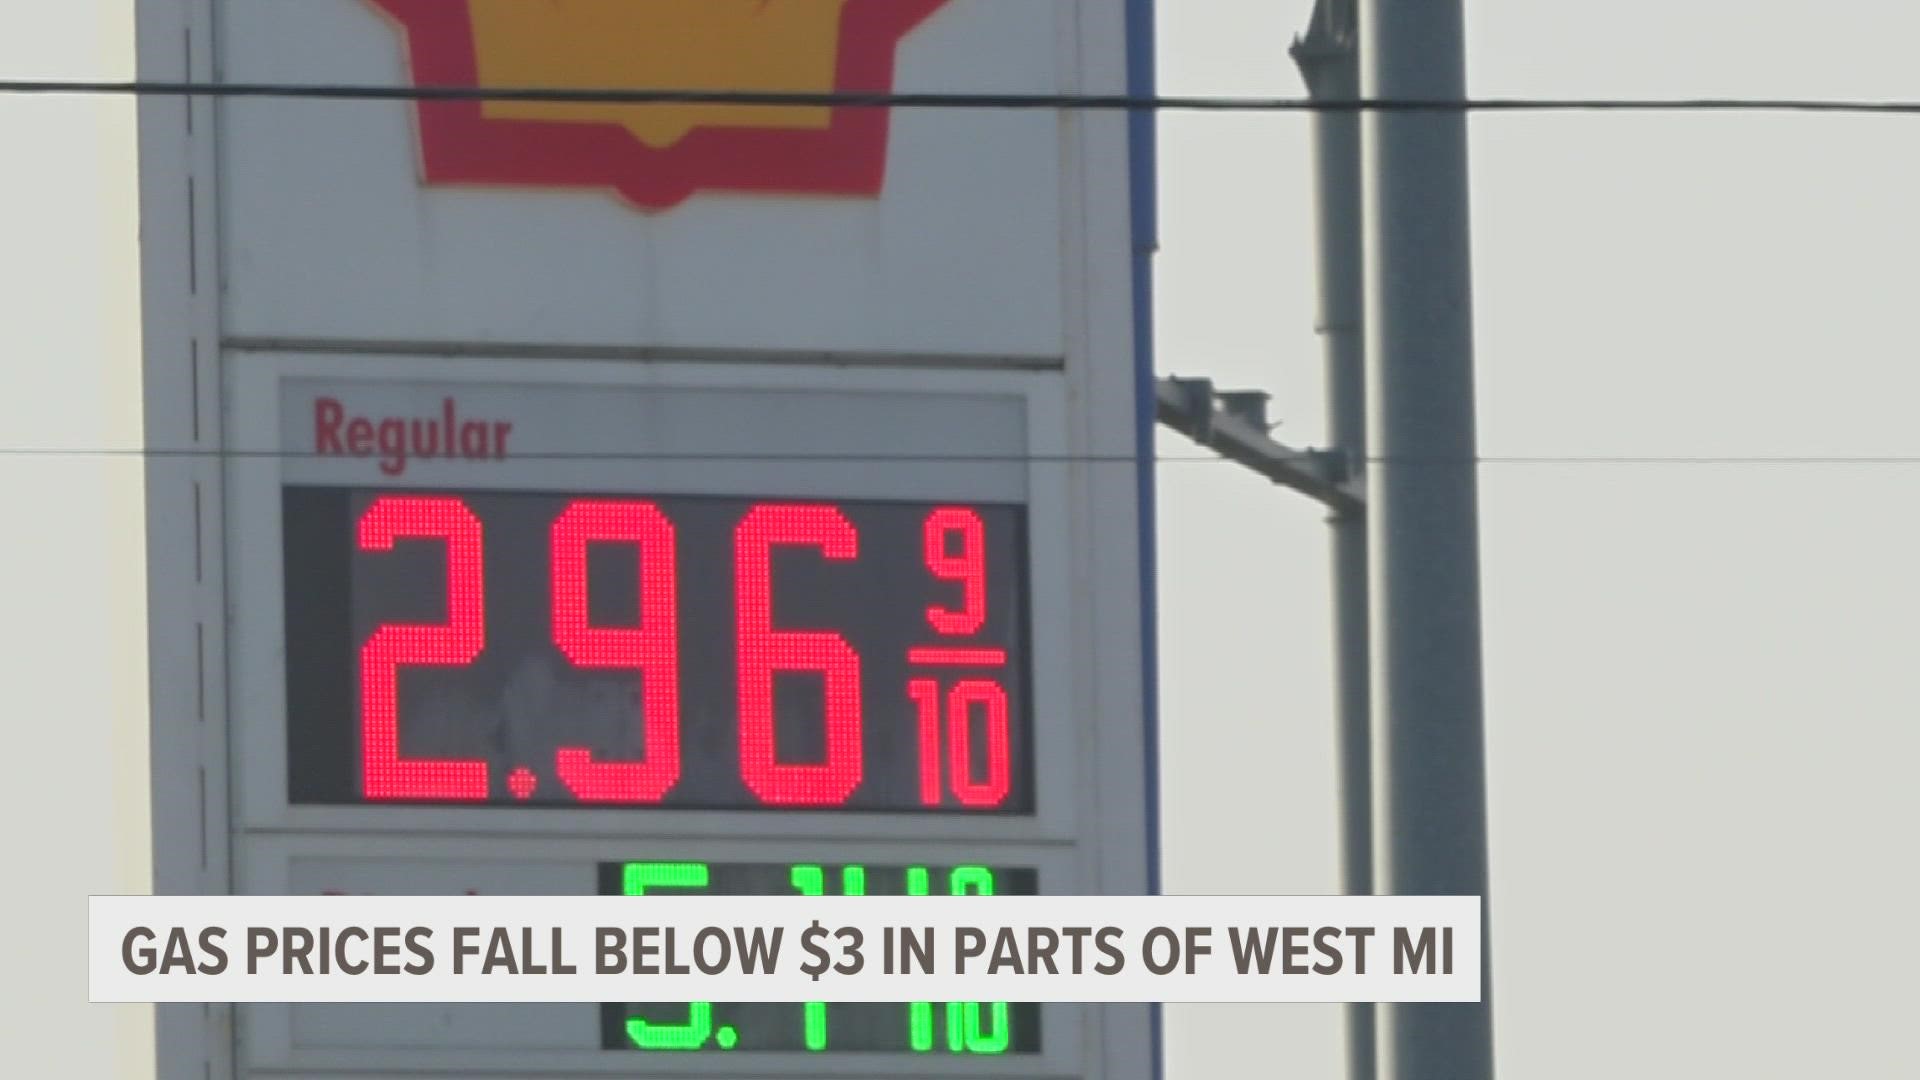 GasBuddy experts say you should shop around if you see gas prices higher than $3.25 a gallon.